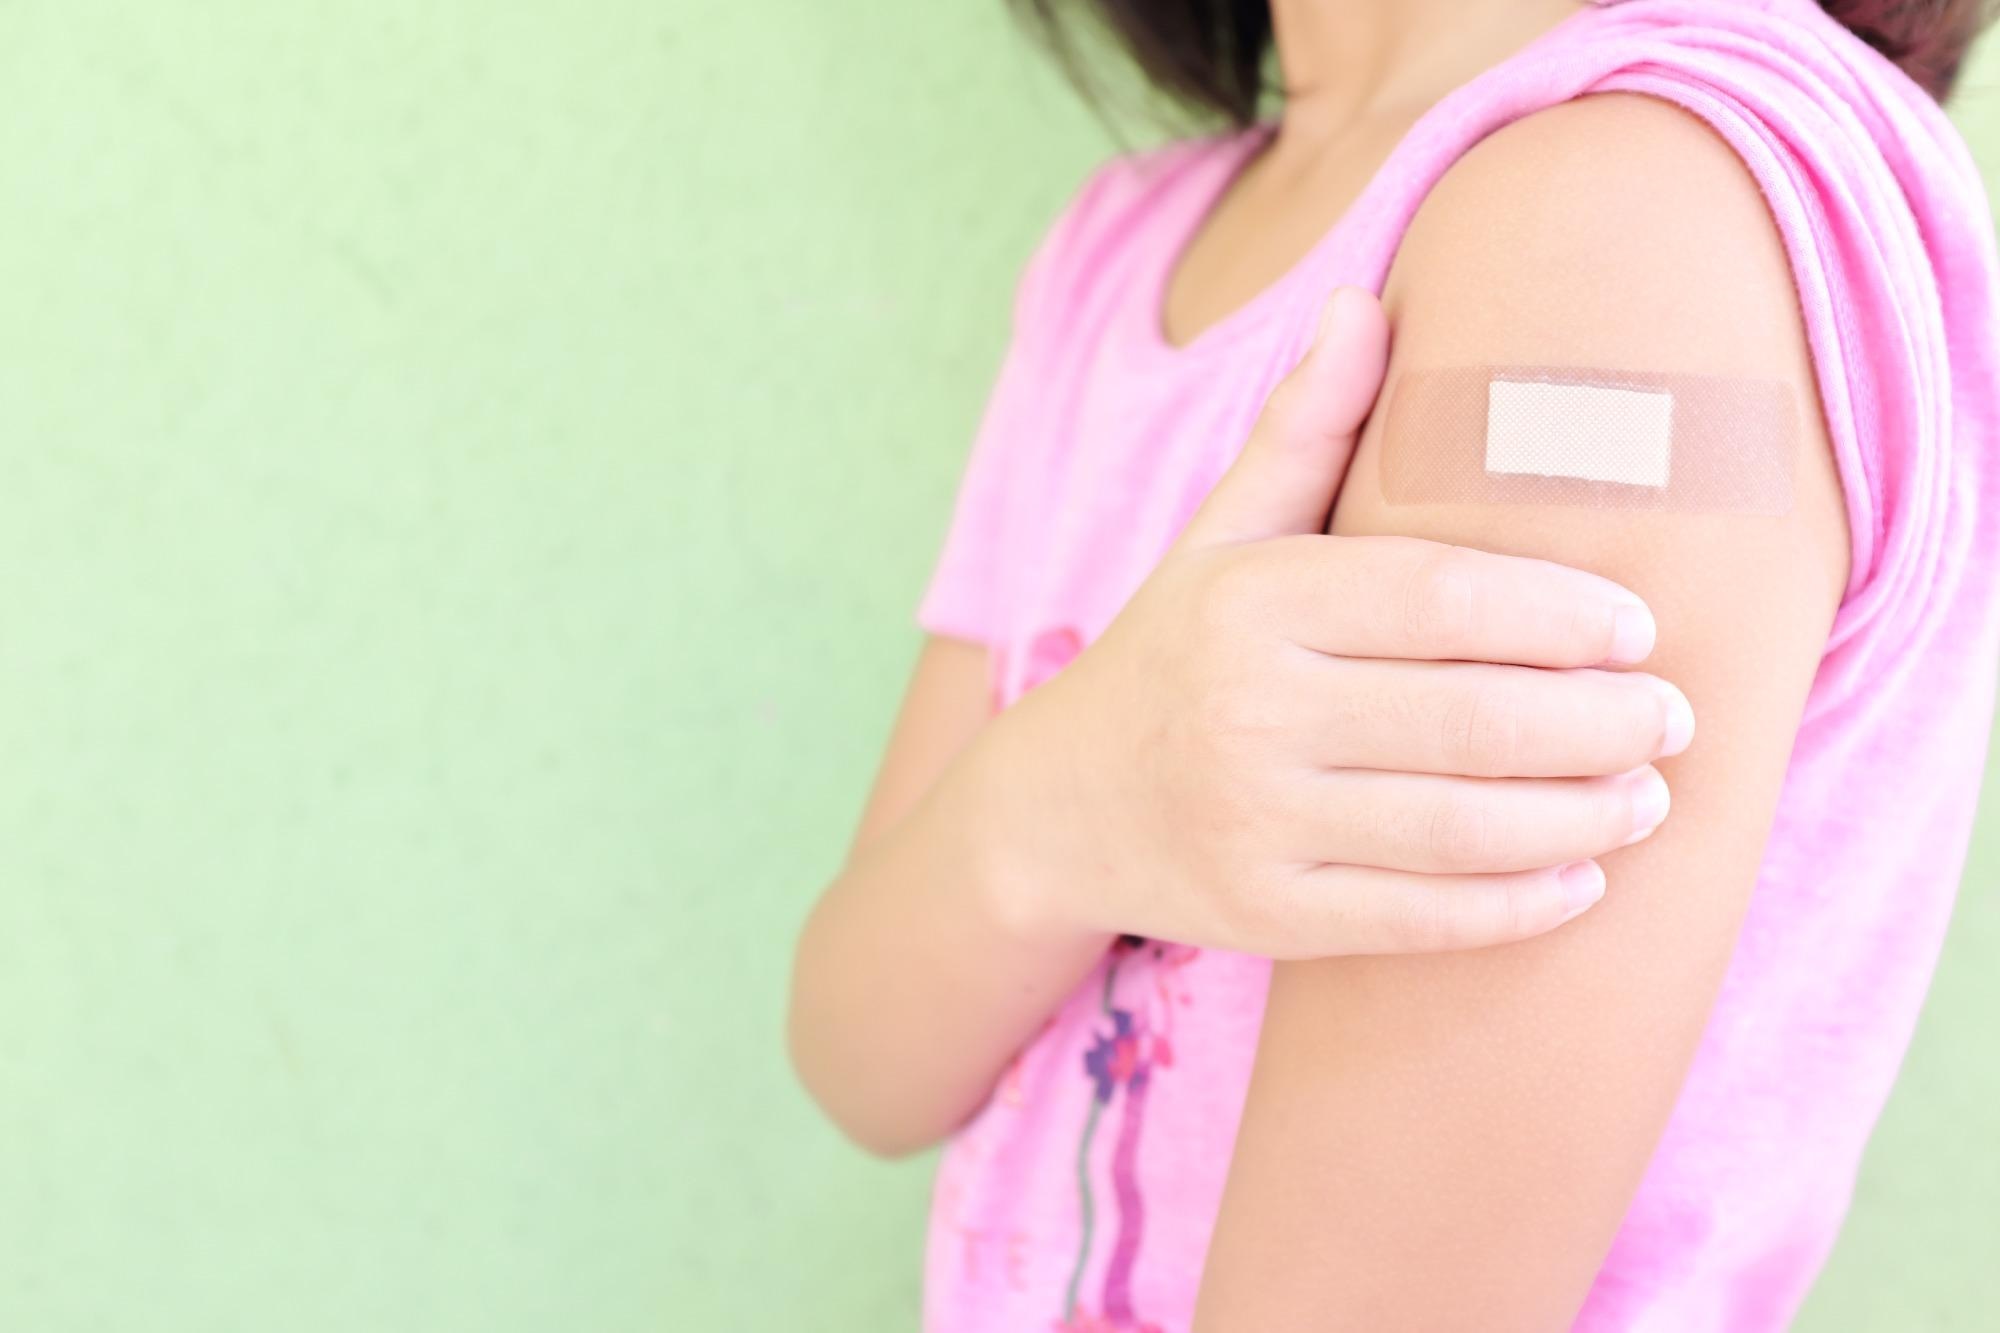 https://www.news-medical.net/news/20220520/Study: Personal risk or societal benefit? Investigating adults’ support for COVID-19 childhood vaccination. Image Credit: Sulit Photos / Shutterstock